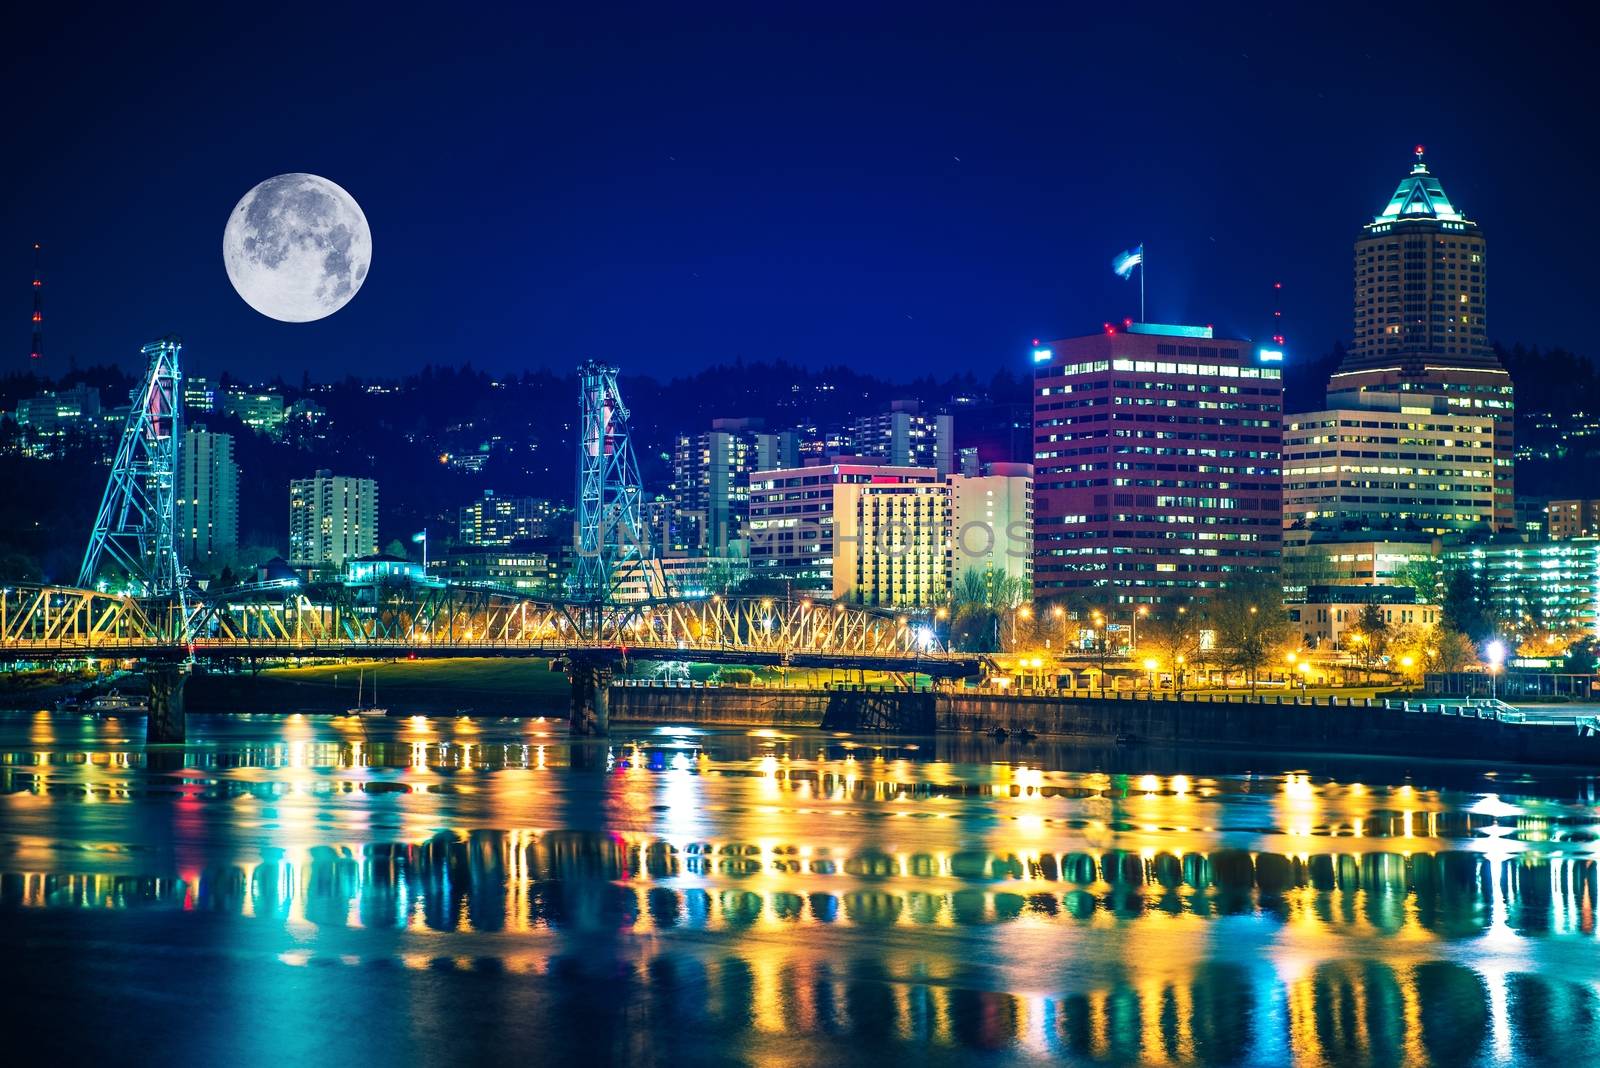 Portland Skyline with Moon and the Willamette River. Downtown Portland, Oregon, United States.